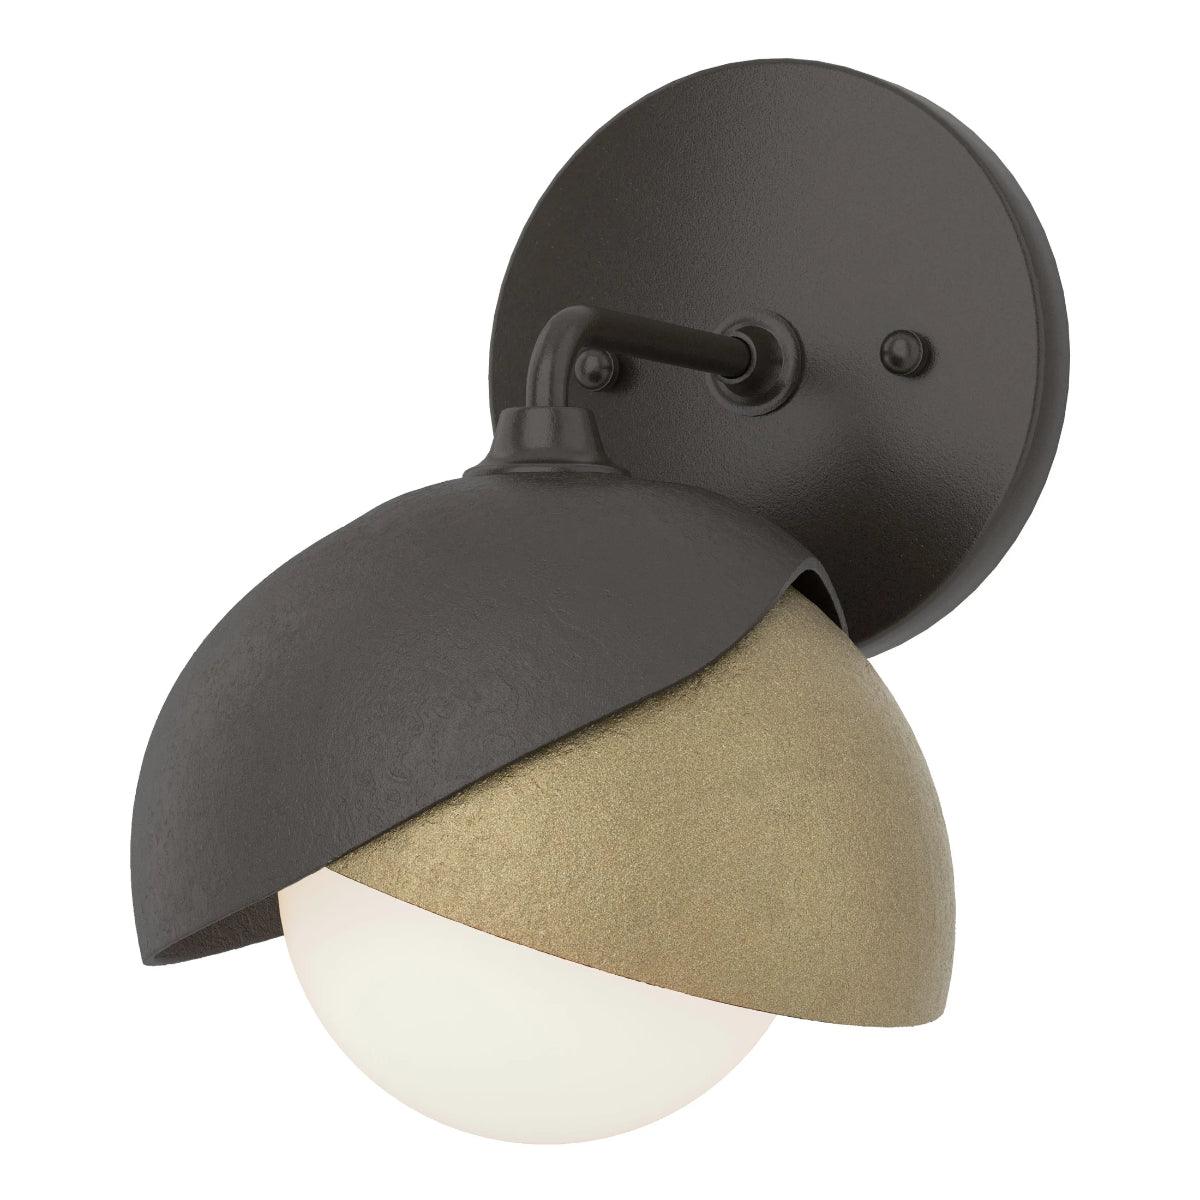 Brooklyn 9 in. Armed Sconce Oil Rubbed Bronze finish